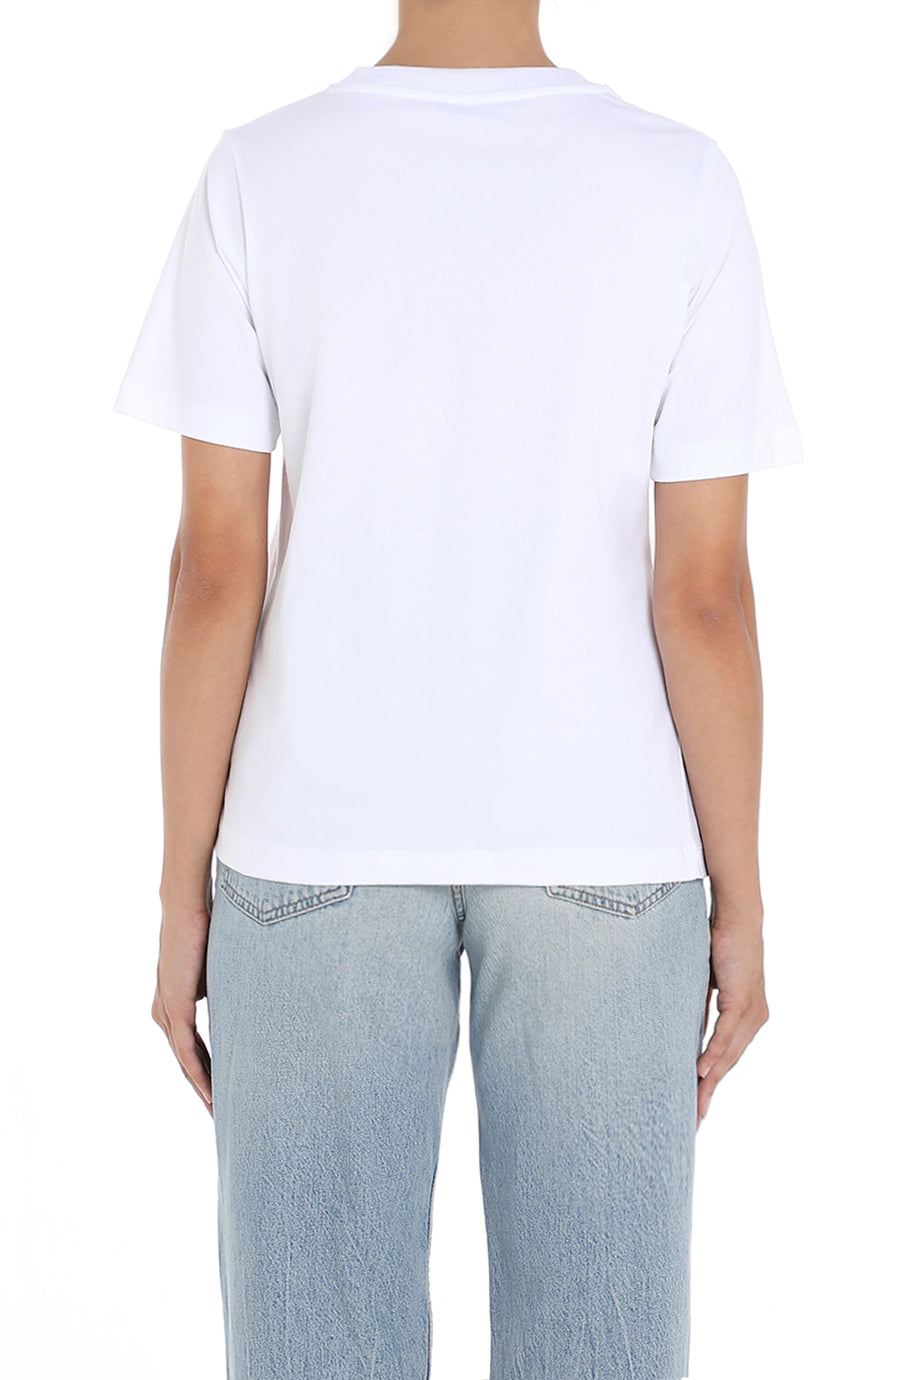 Christopher Kane Crystal Cupchain T-Shirt in White. Back view.